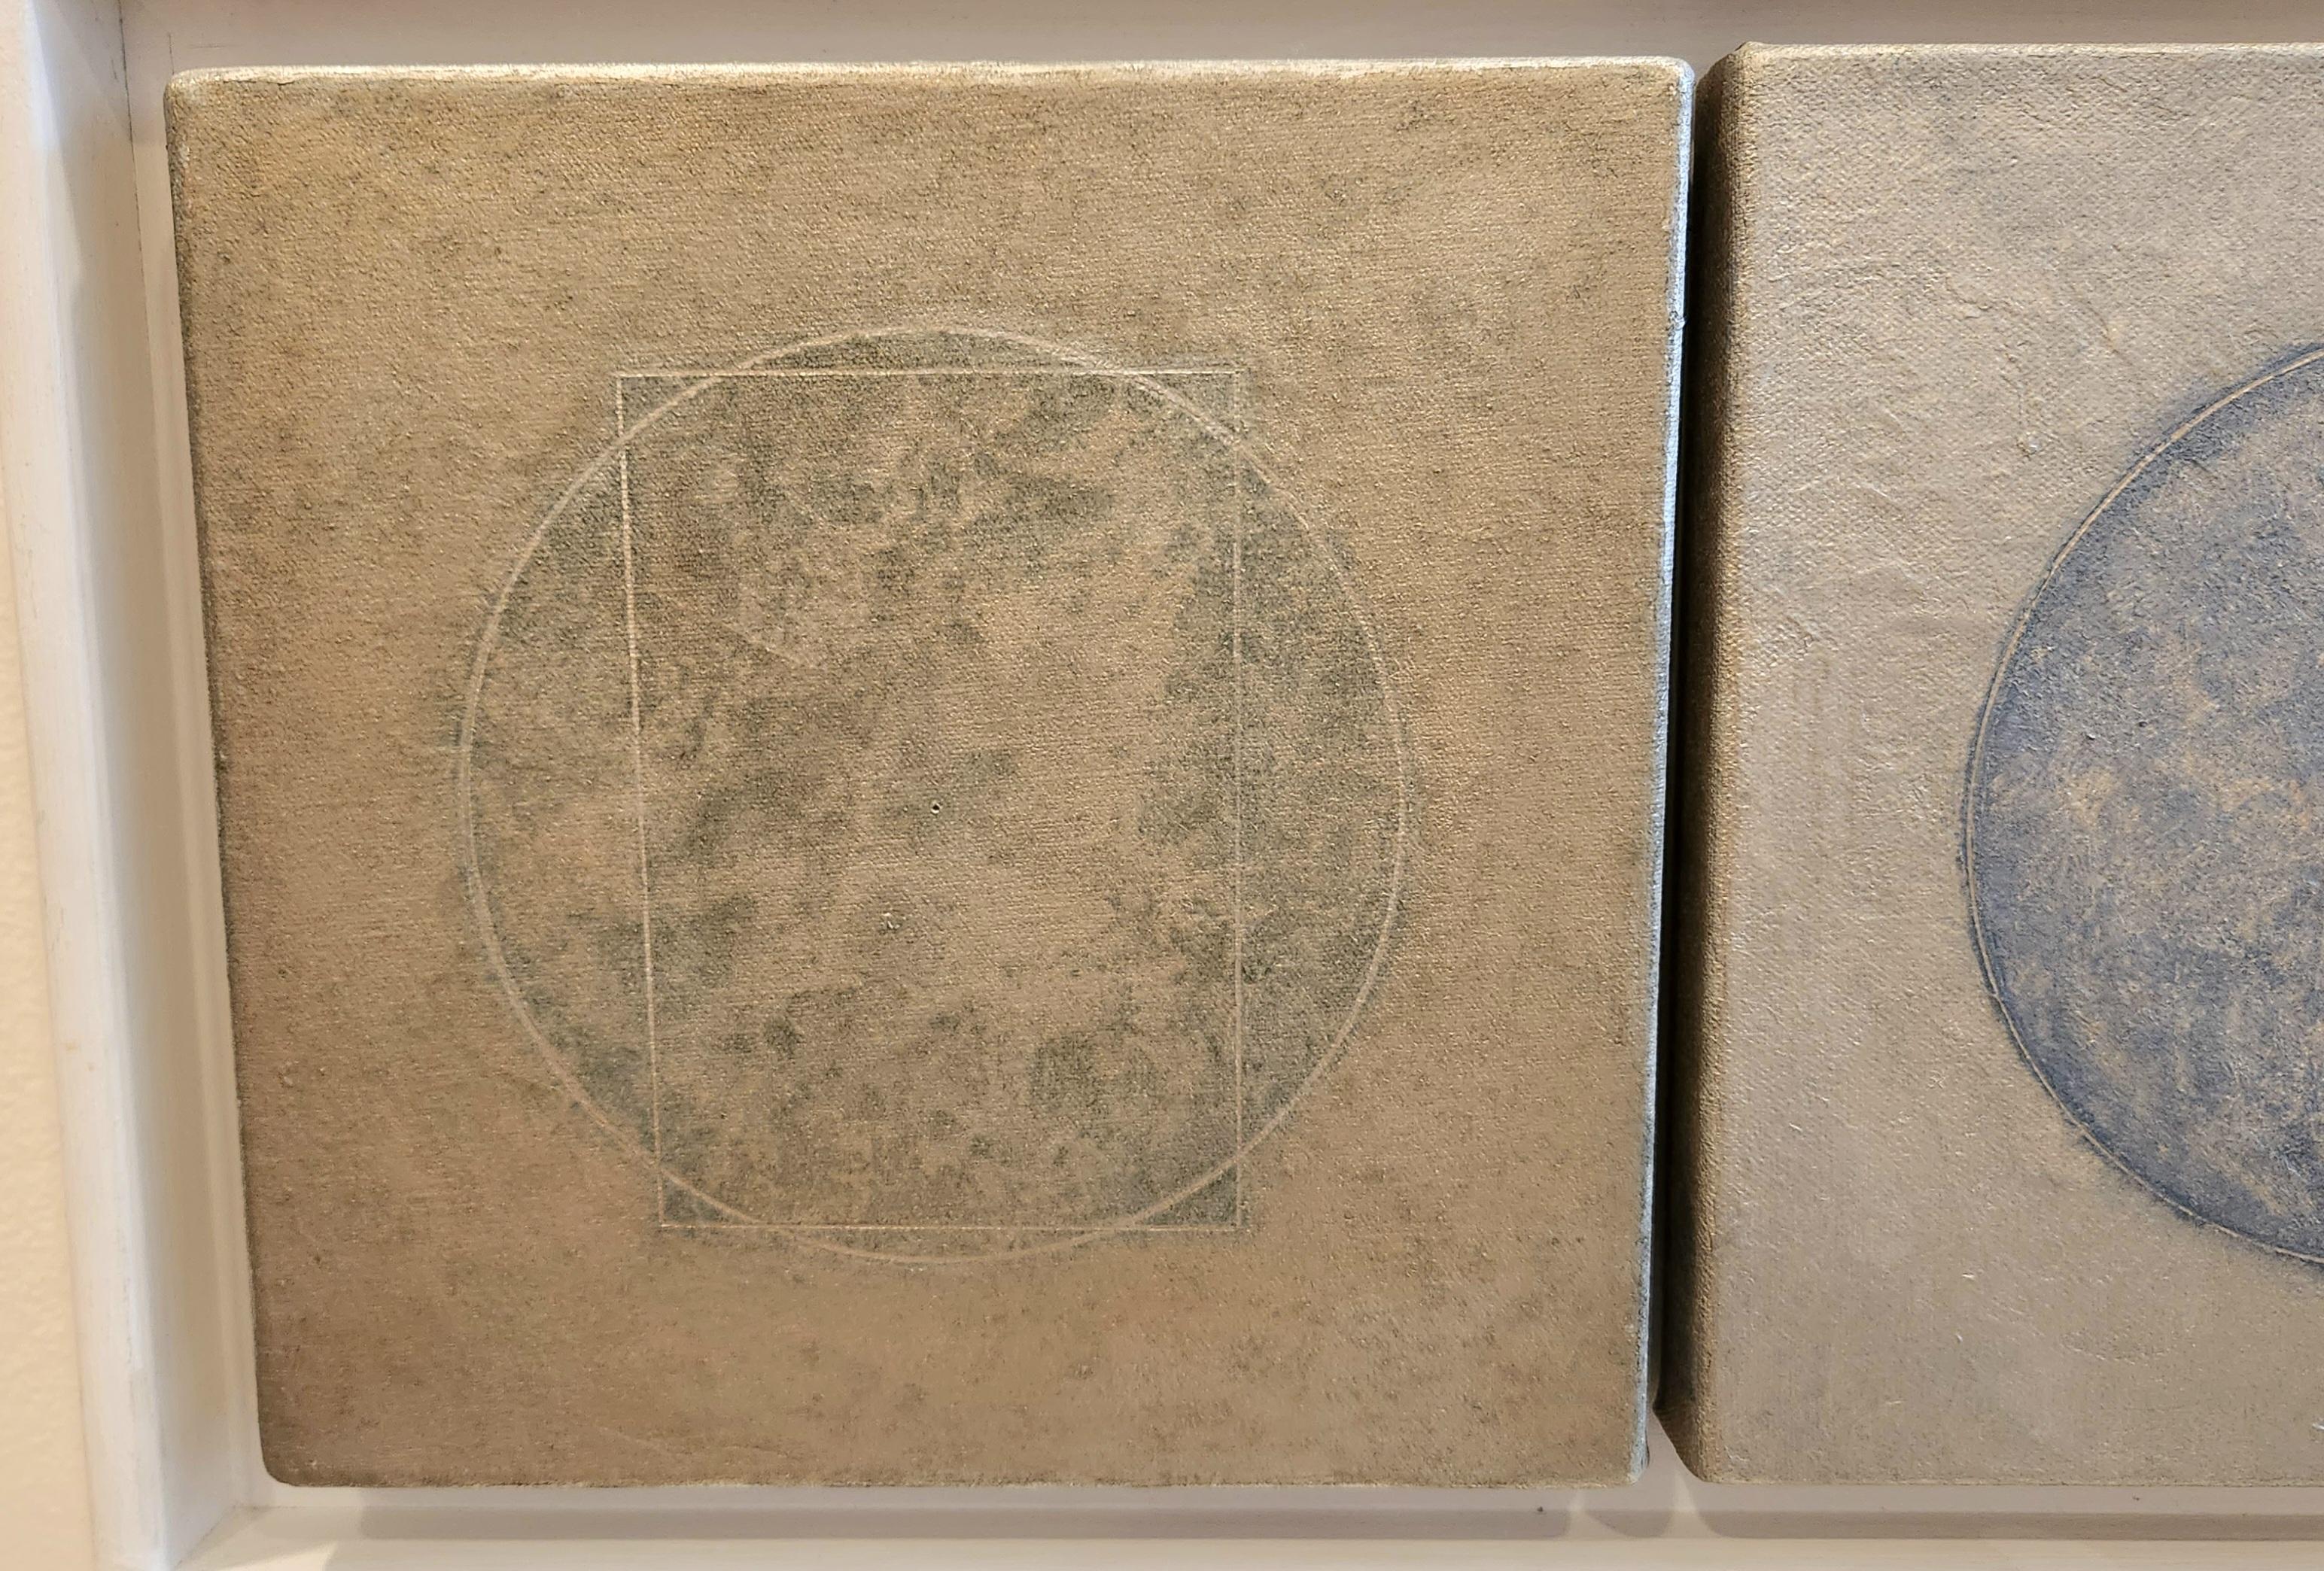 In each of these pieces is a blue circle in the center, with rectangles in two, over a silver metallic background. The blues used in each of these is very nuanced in how it is applied to the canvas that brings out the unique texture of the works.